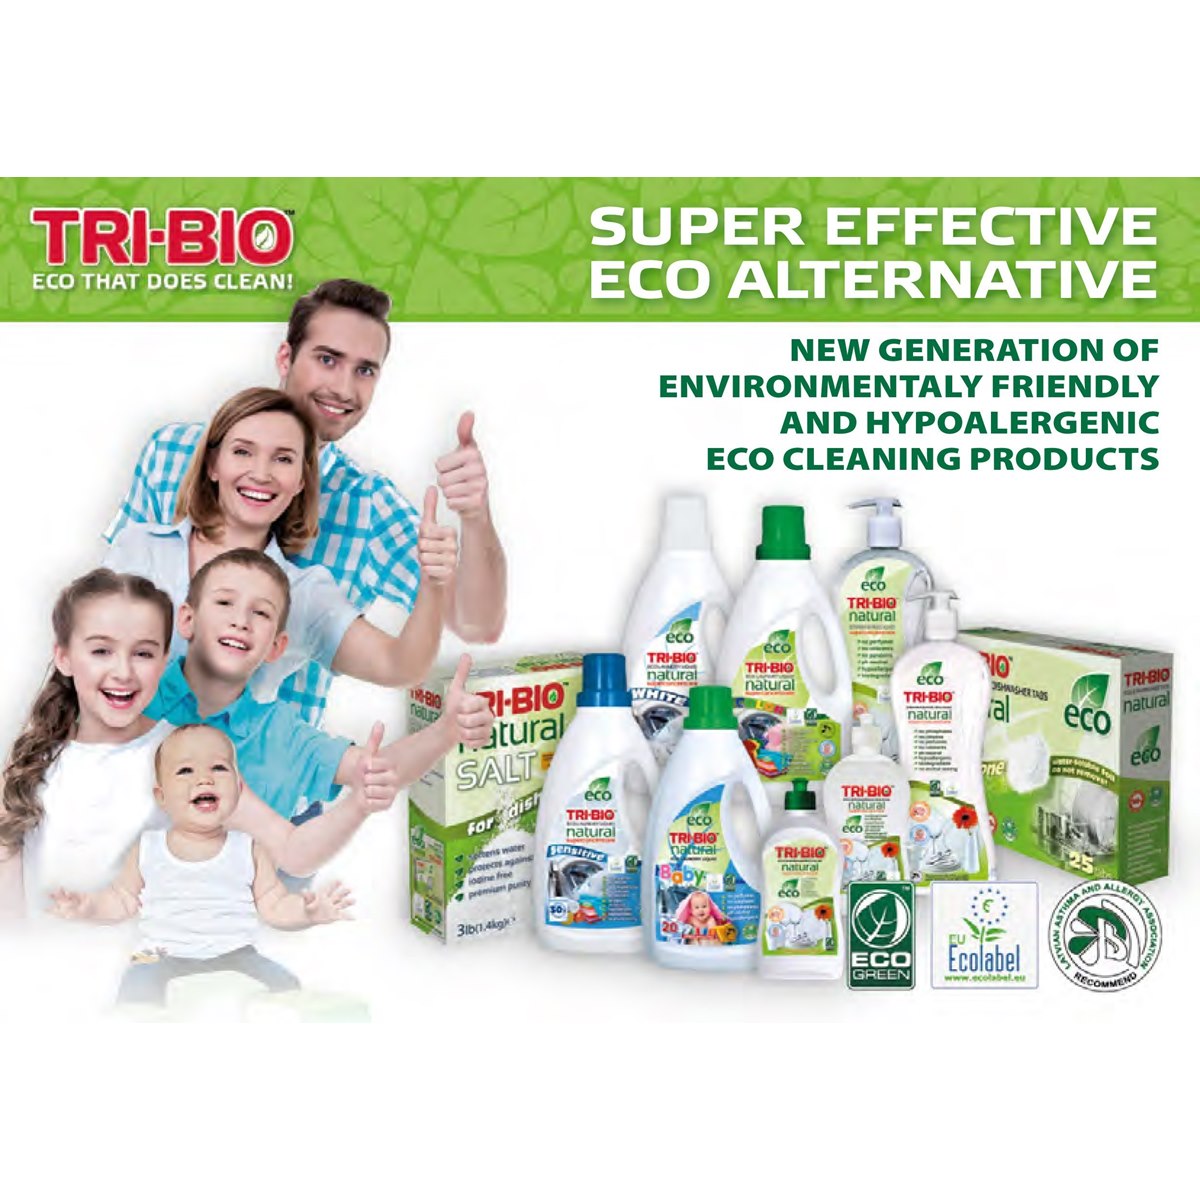 Where to Buy Tri Bio Products